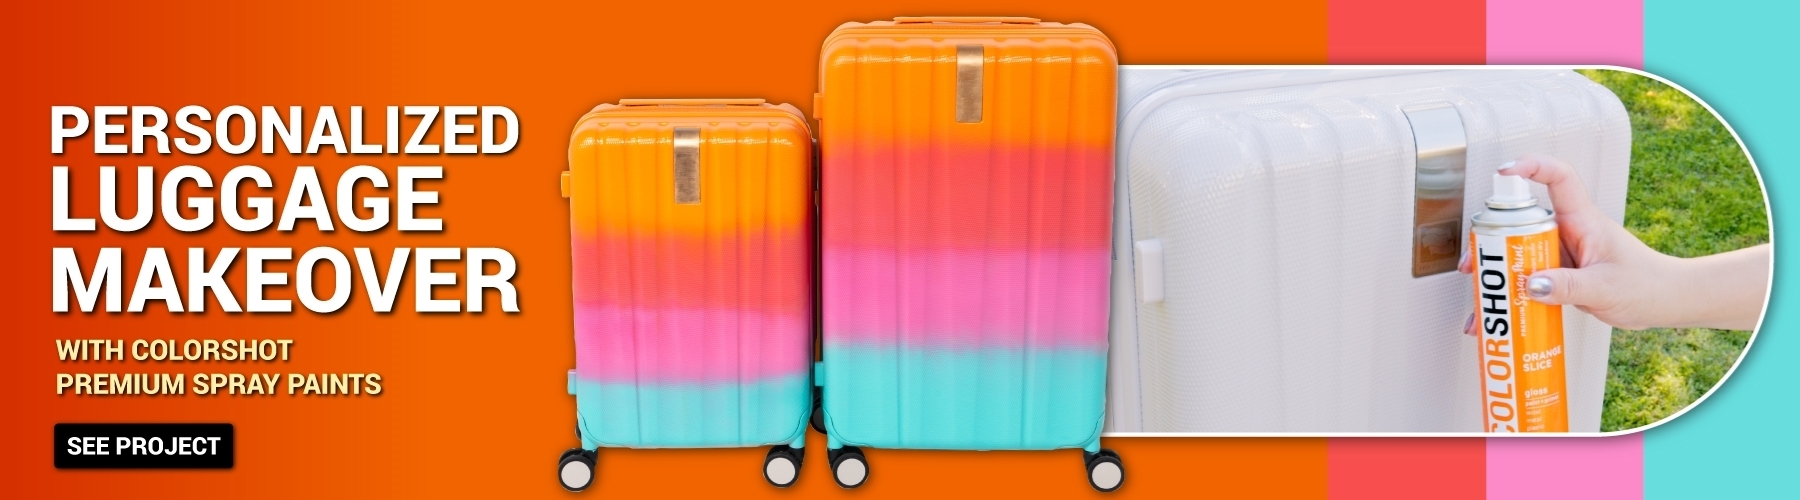 Personalized luggage makeover